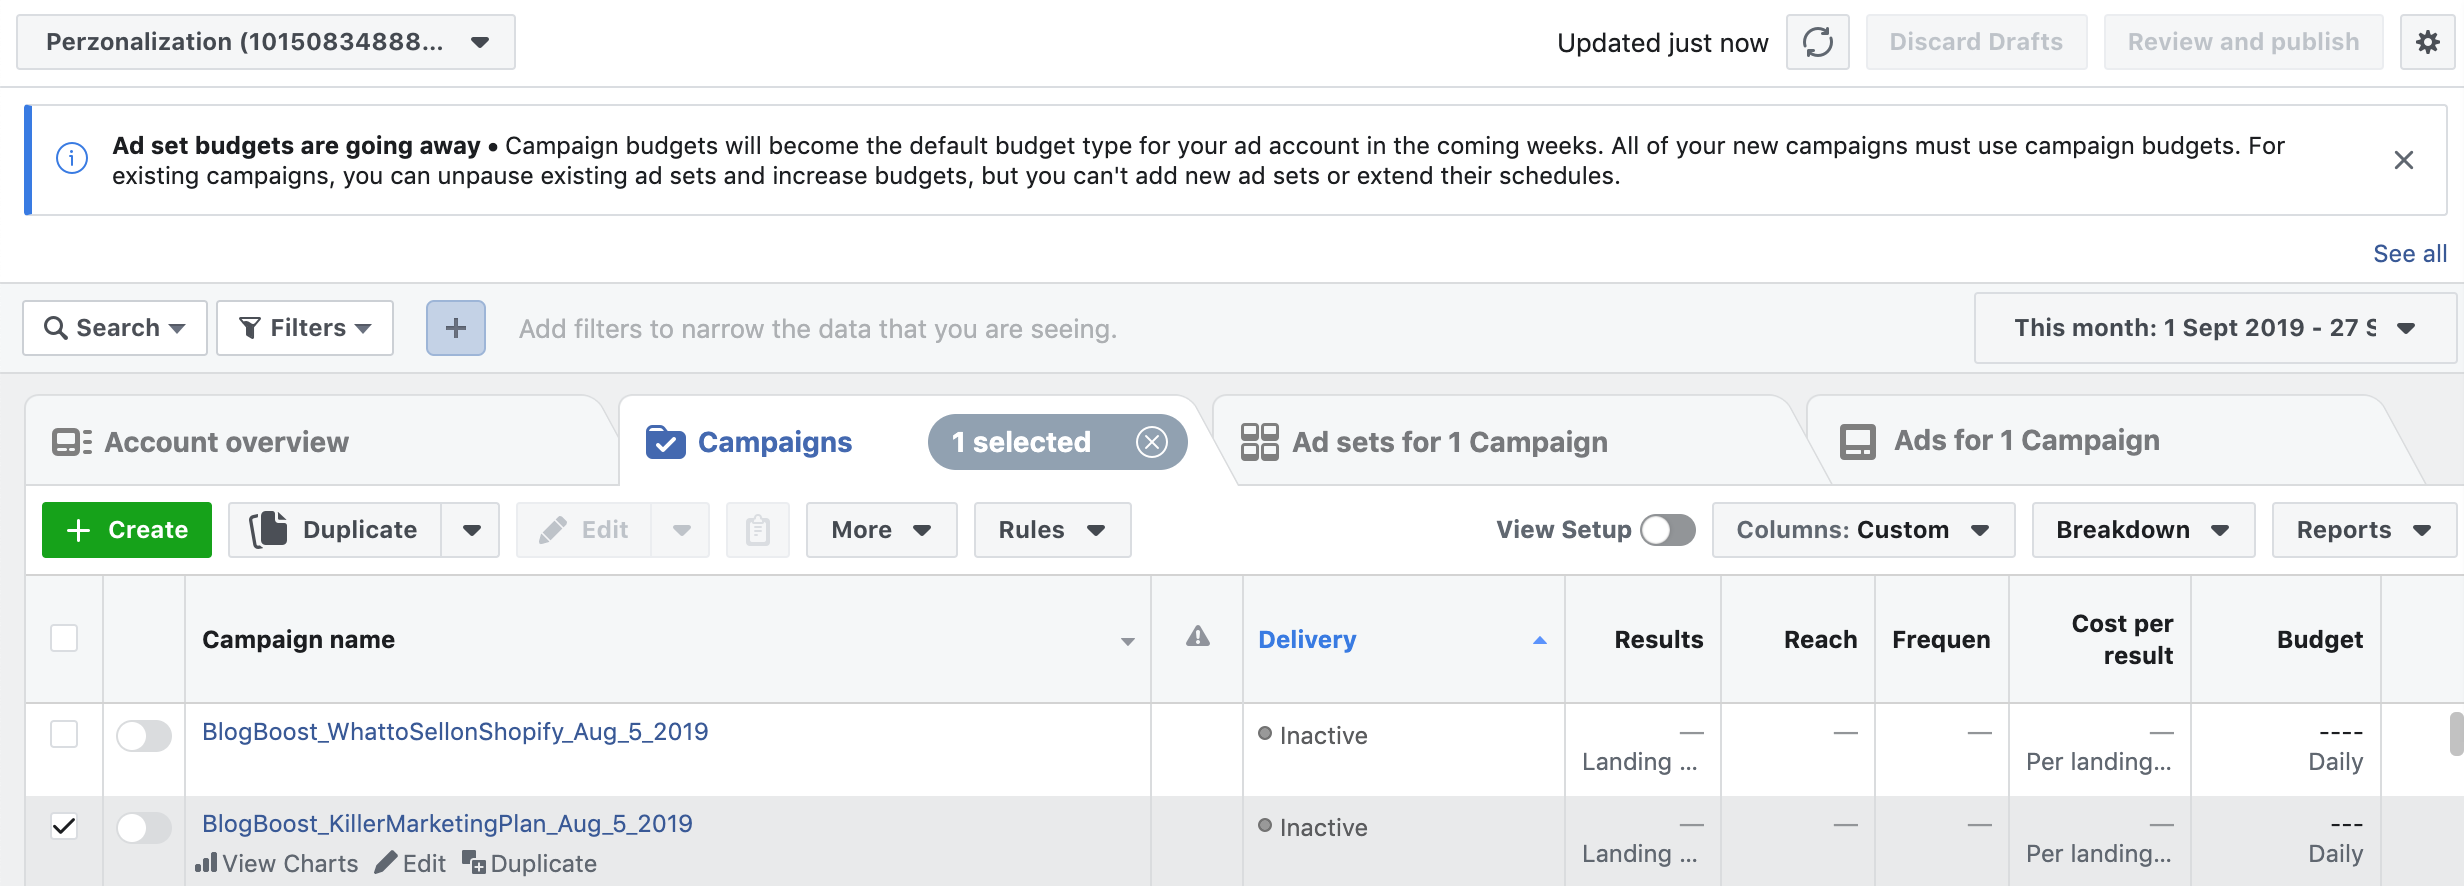 This Facebook Ads management guide will light your way and help you to craft outstanding ads that will attract the full attention of your target audience.